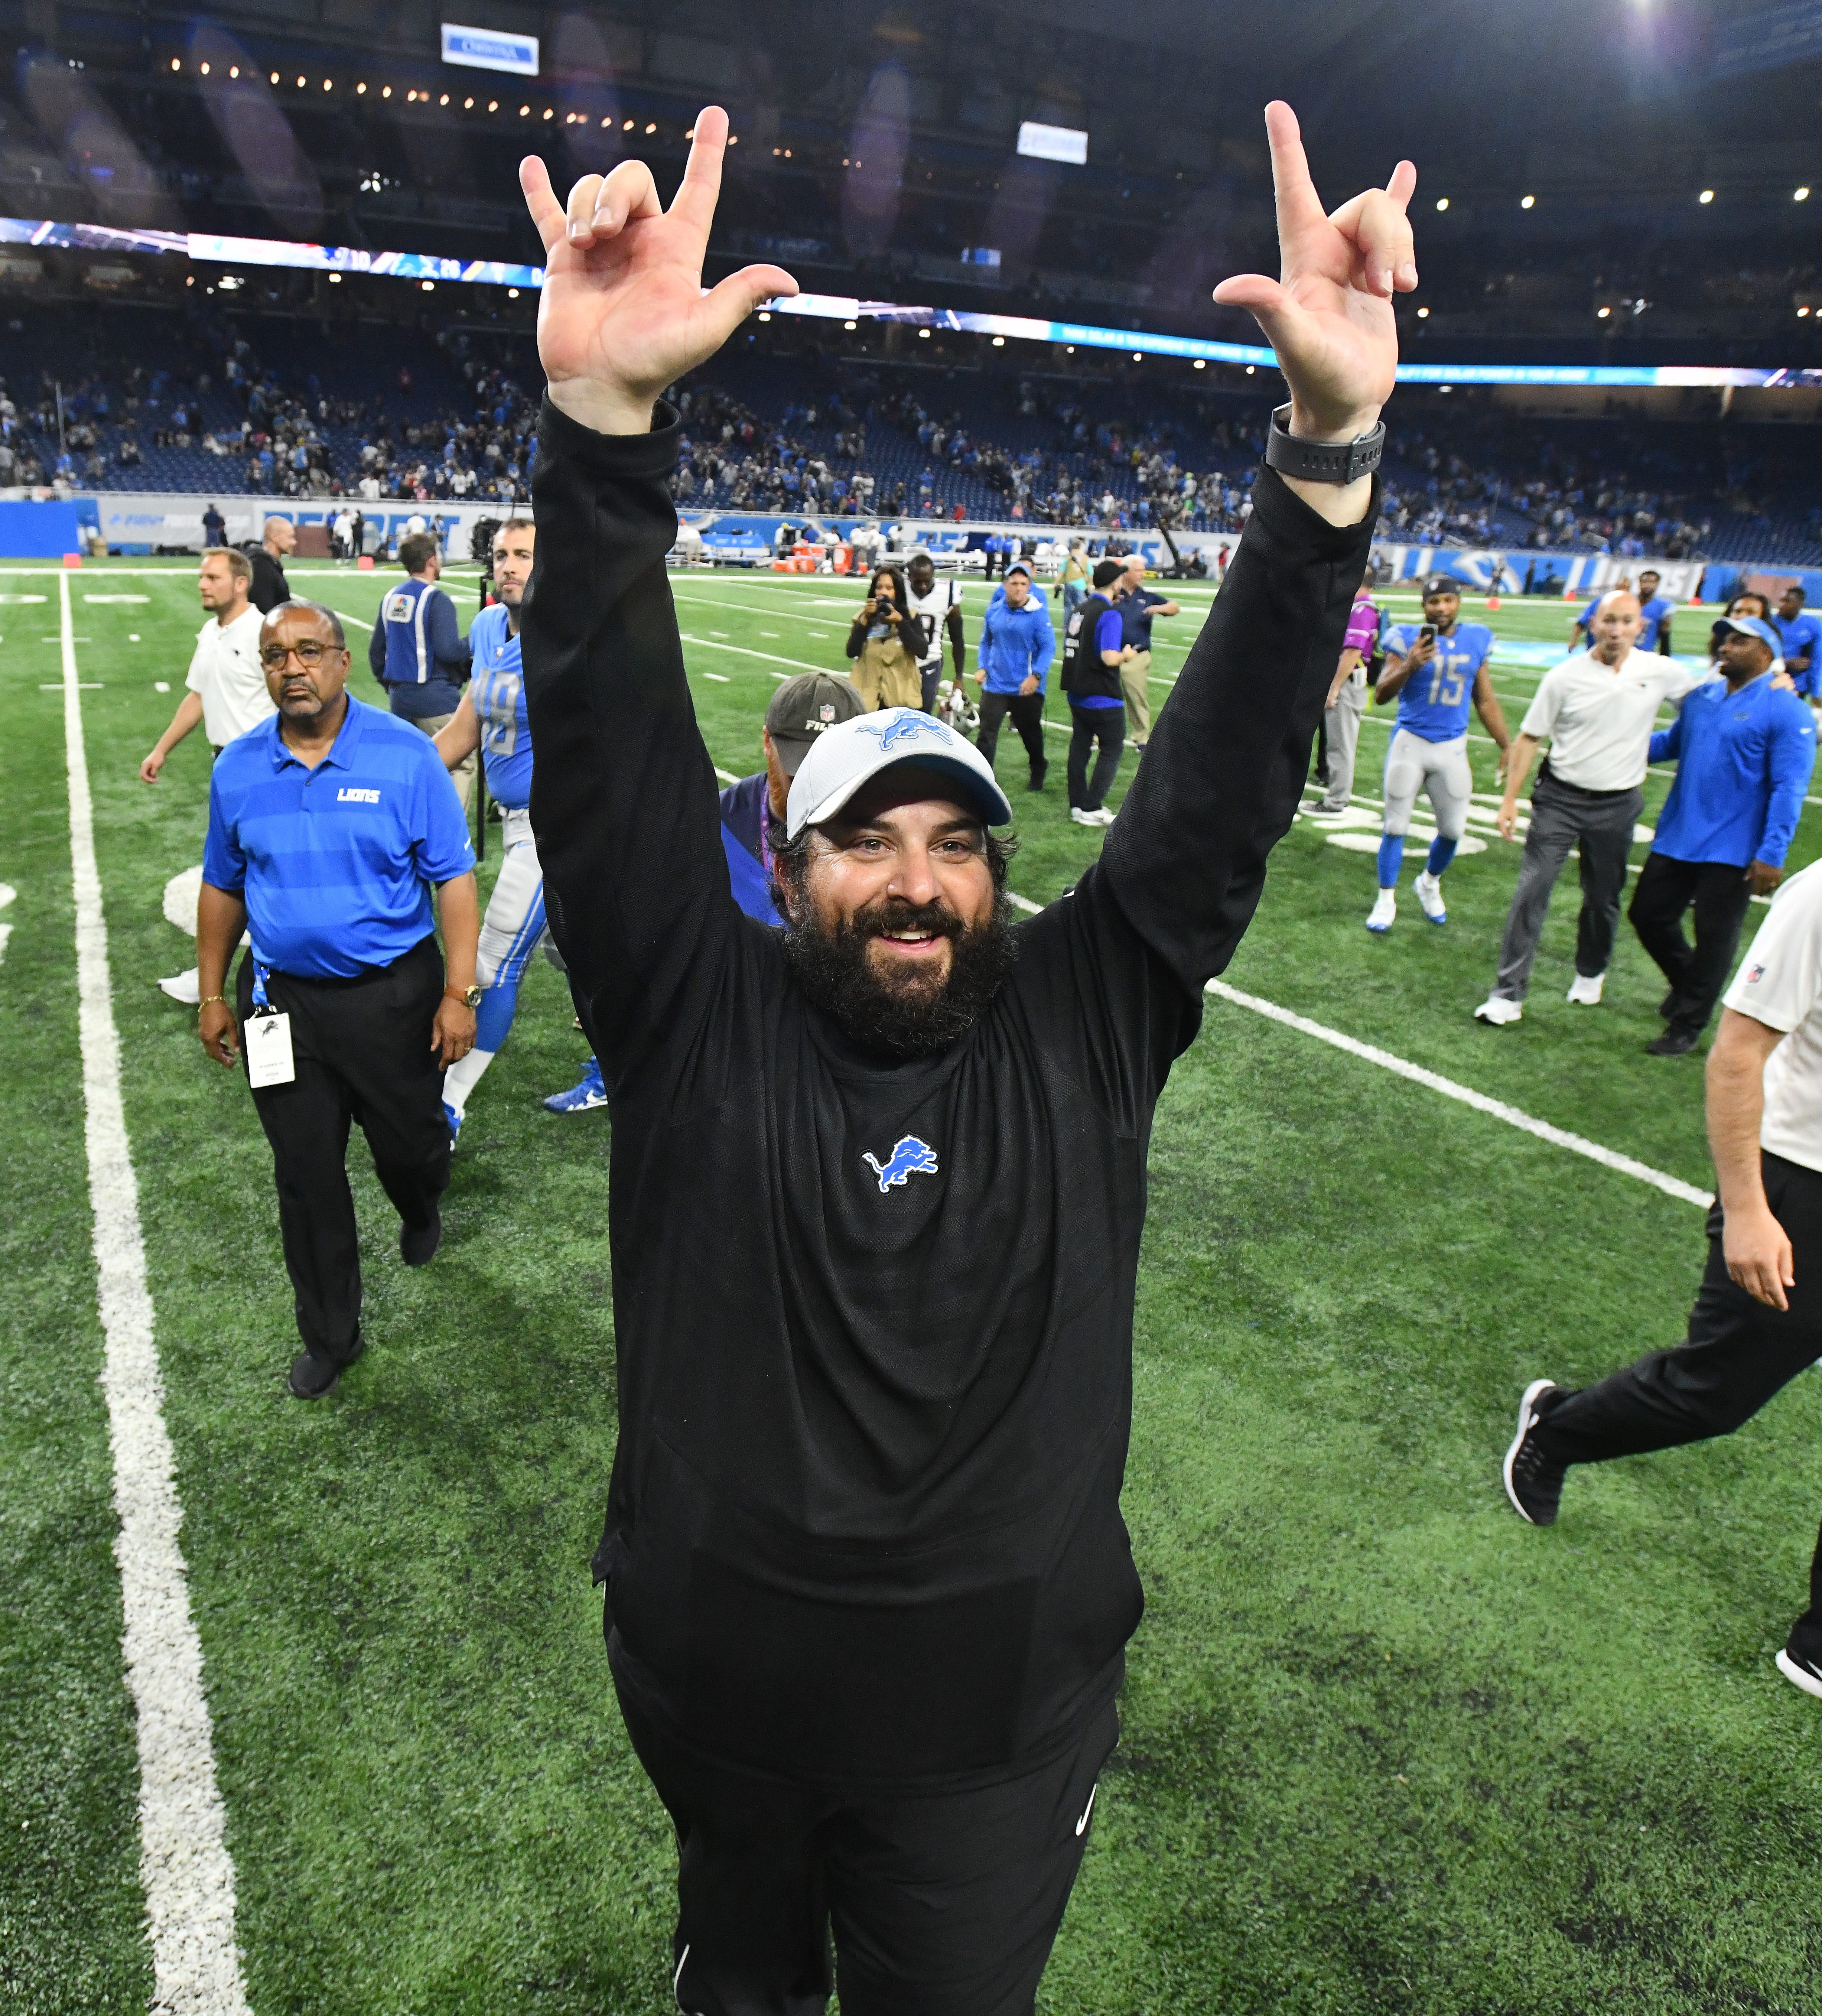 Lions head coach Matt Patricia raises his hands, waving to the stands after the 26-10 victory over his old team, the New England Patriots at Ford Field in Detroit, Michigan on September 23, 2018.